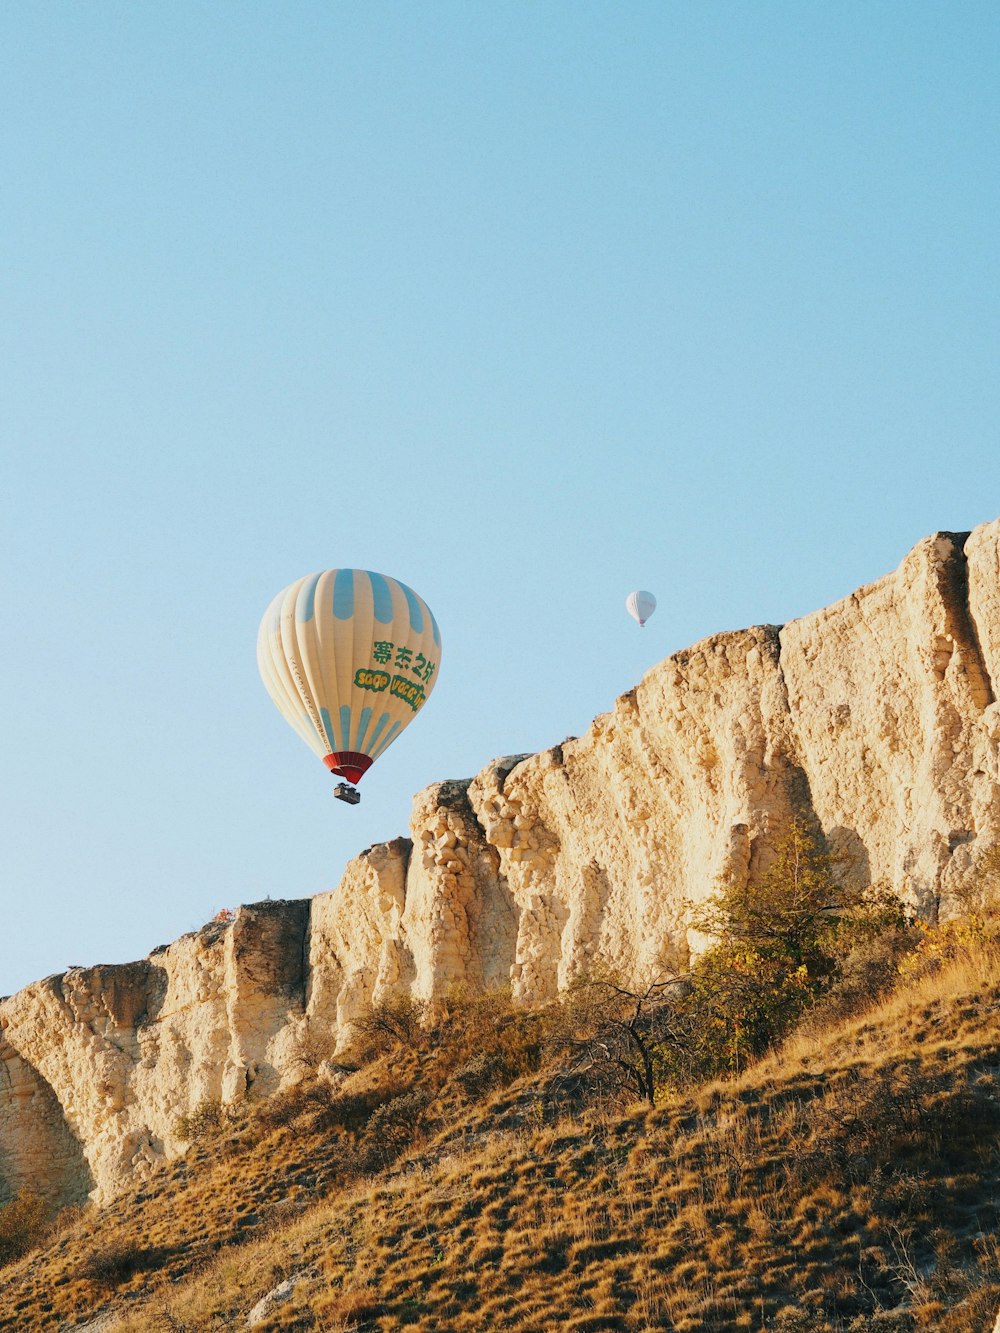 two hot air balloons flying over a rocky hillside